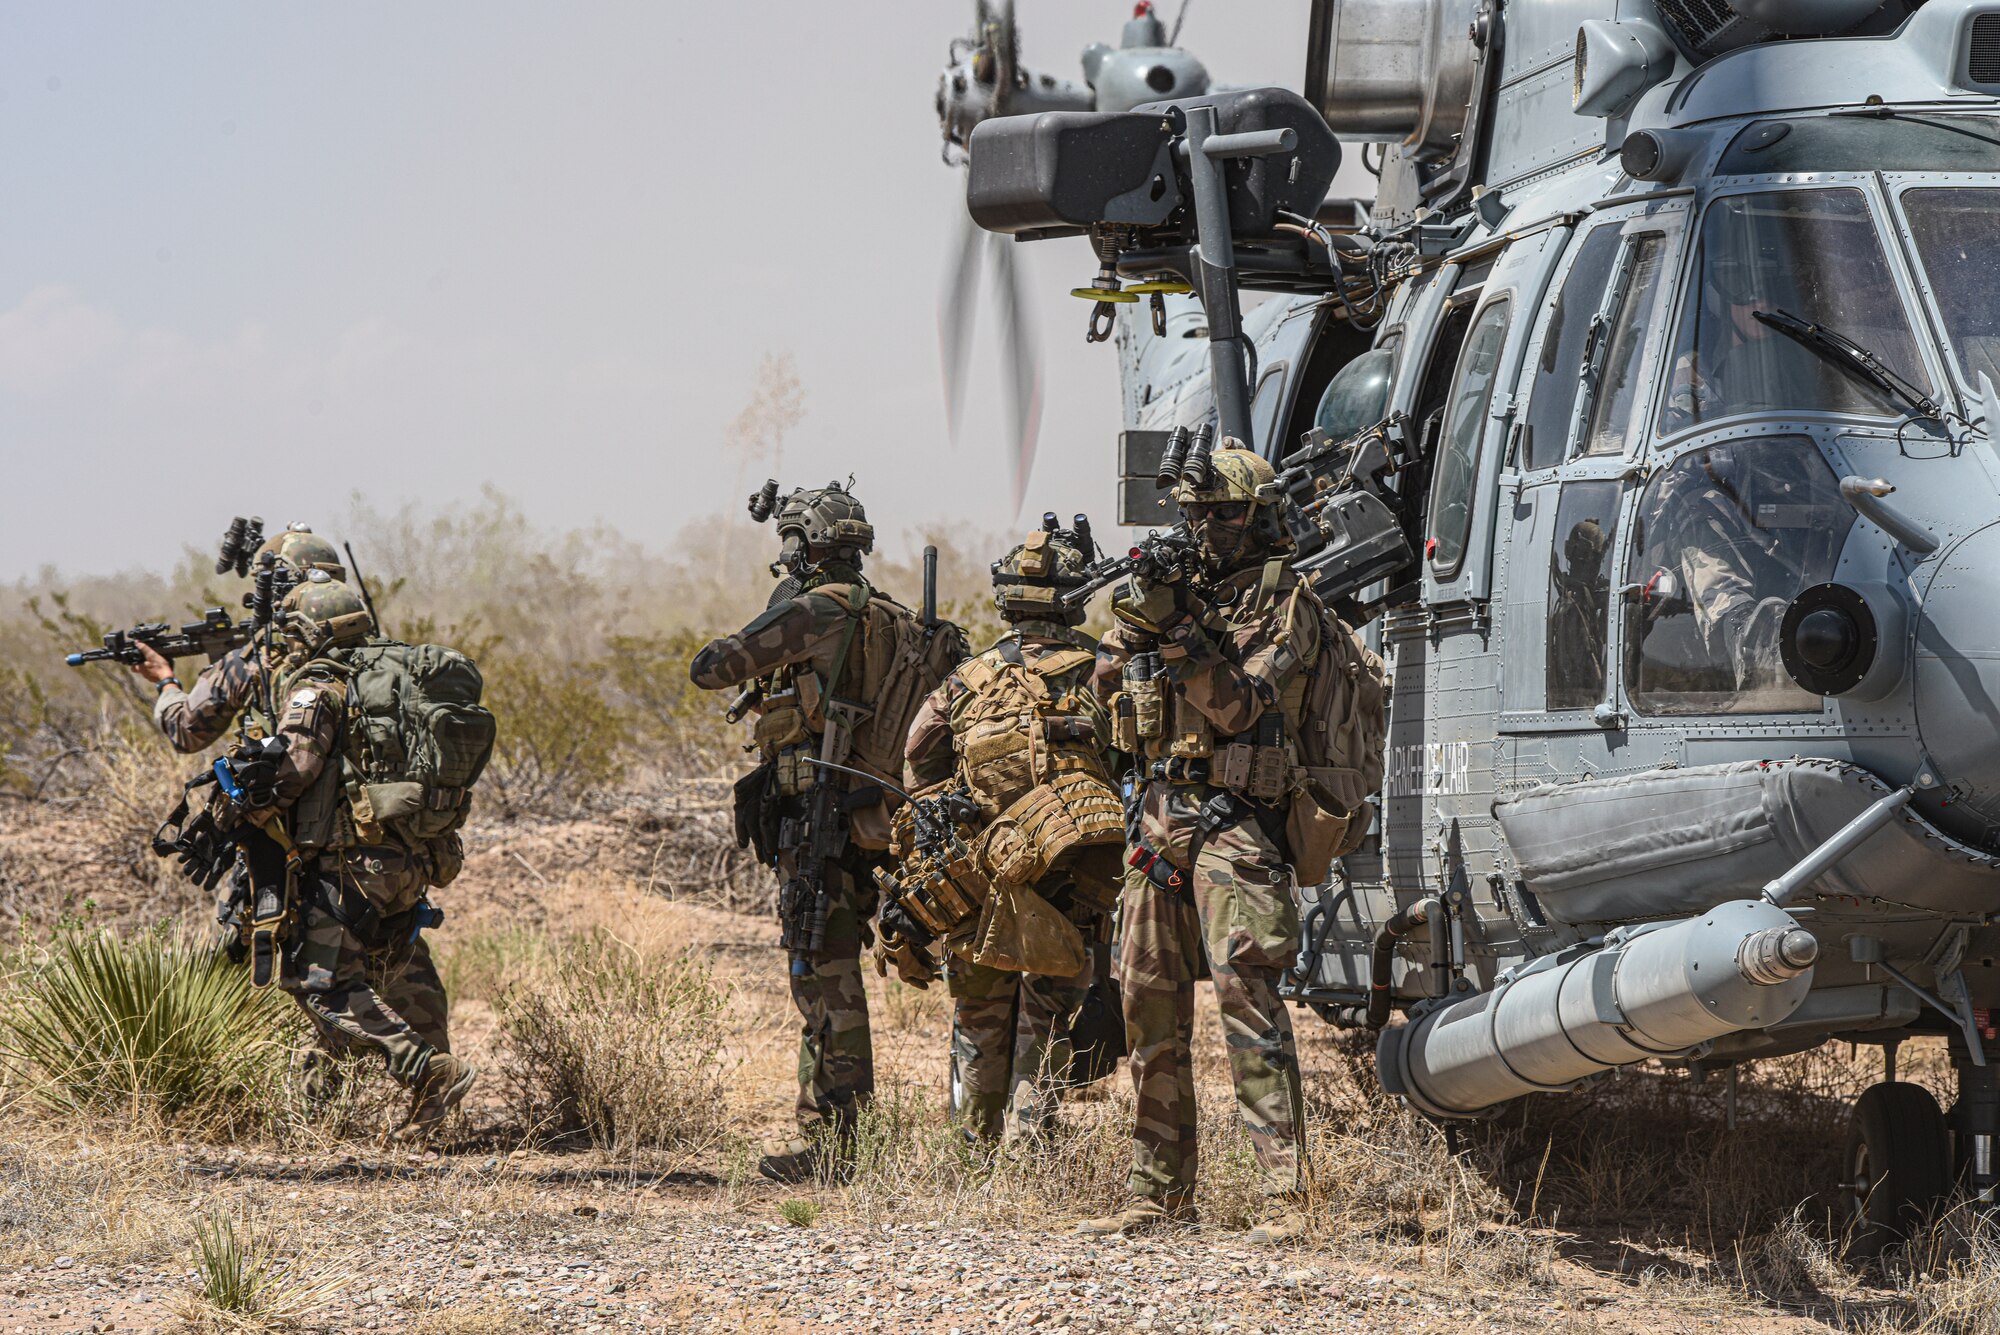 A group of soldiers board a helcopter.